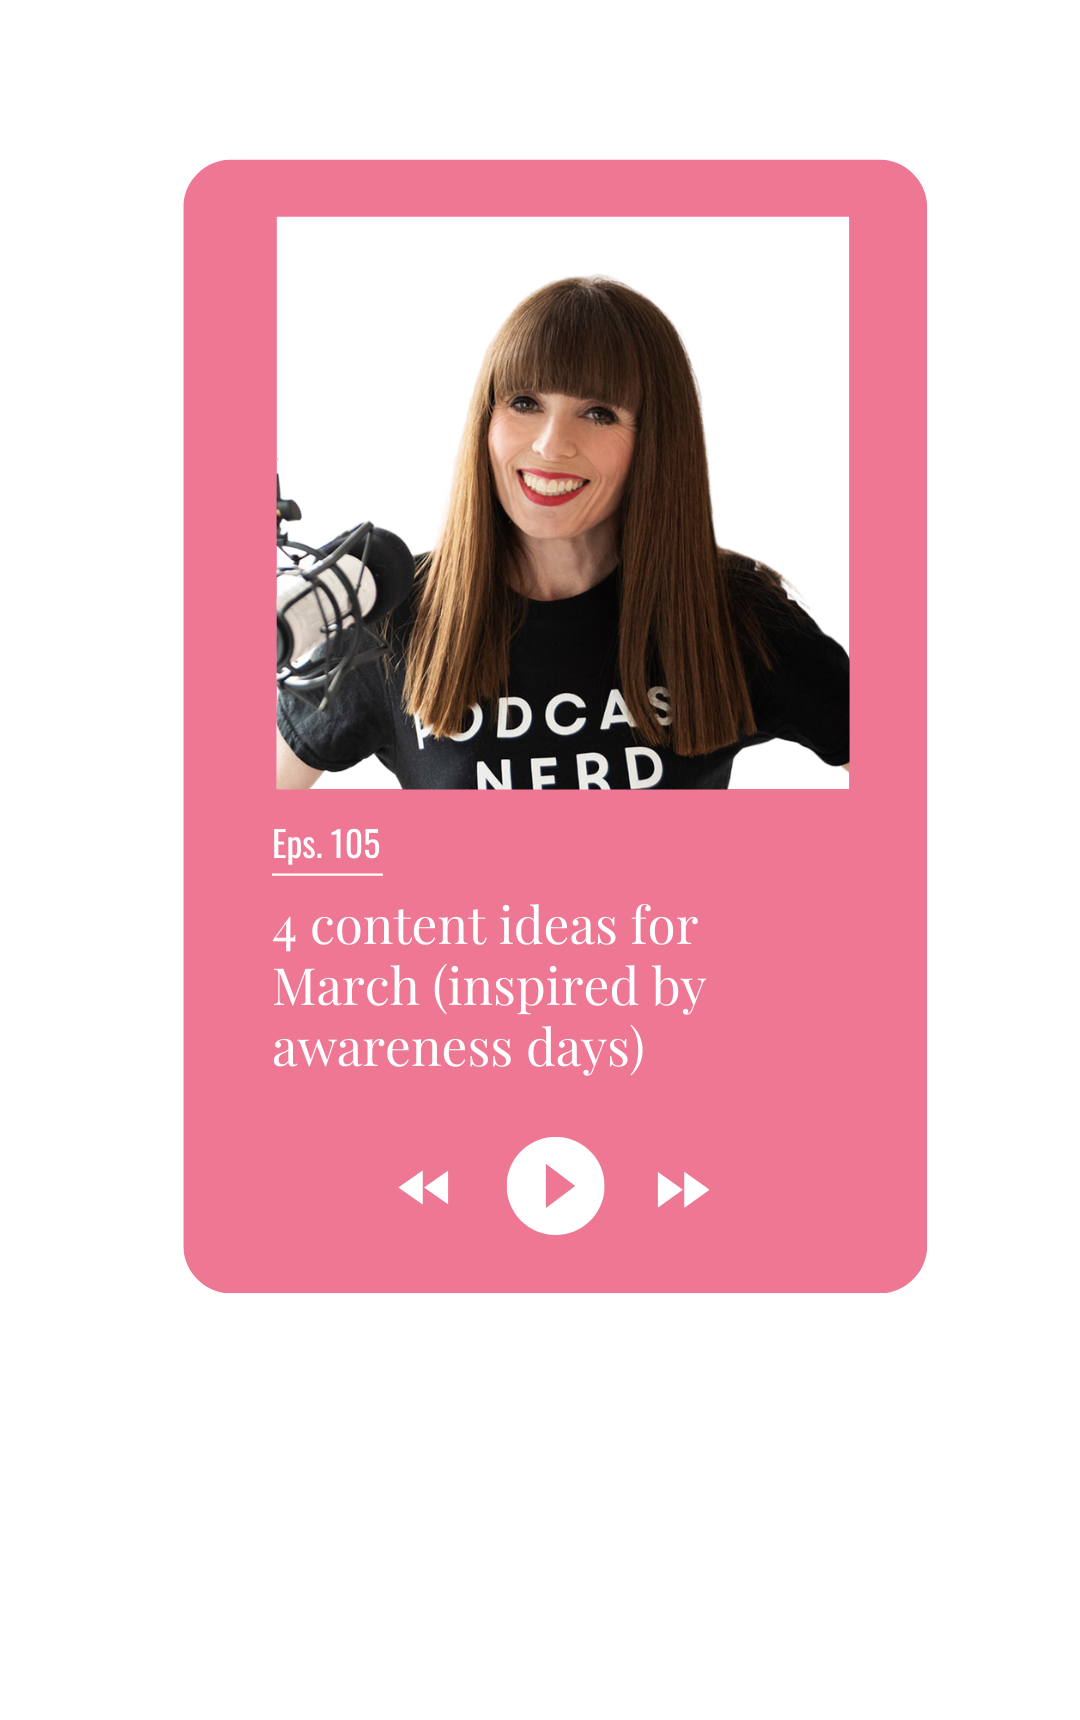 4 content ideas for March (inspired by awareness days)